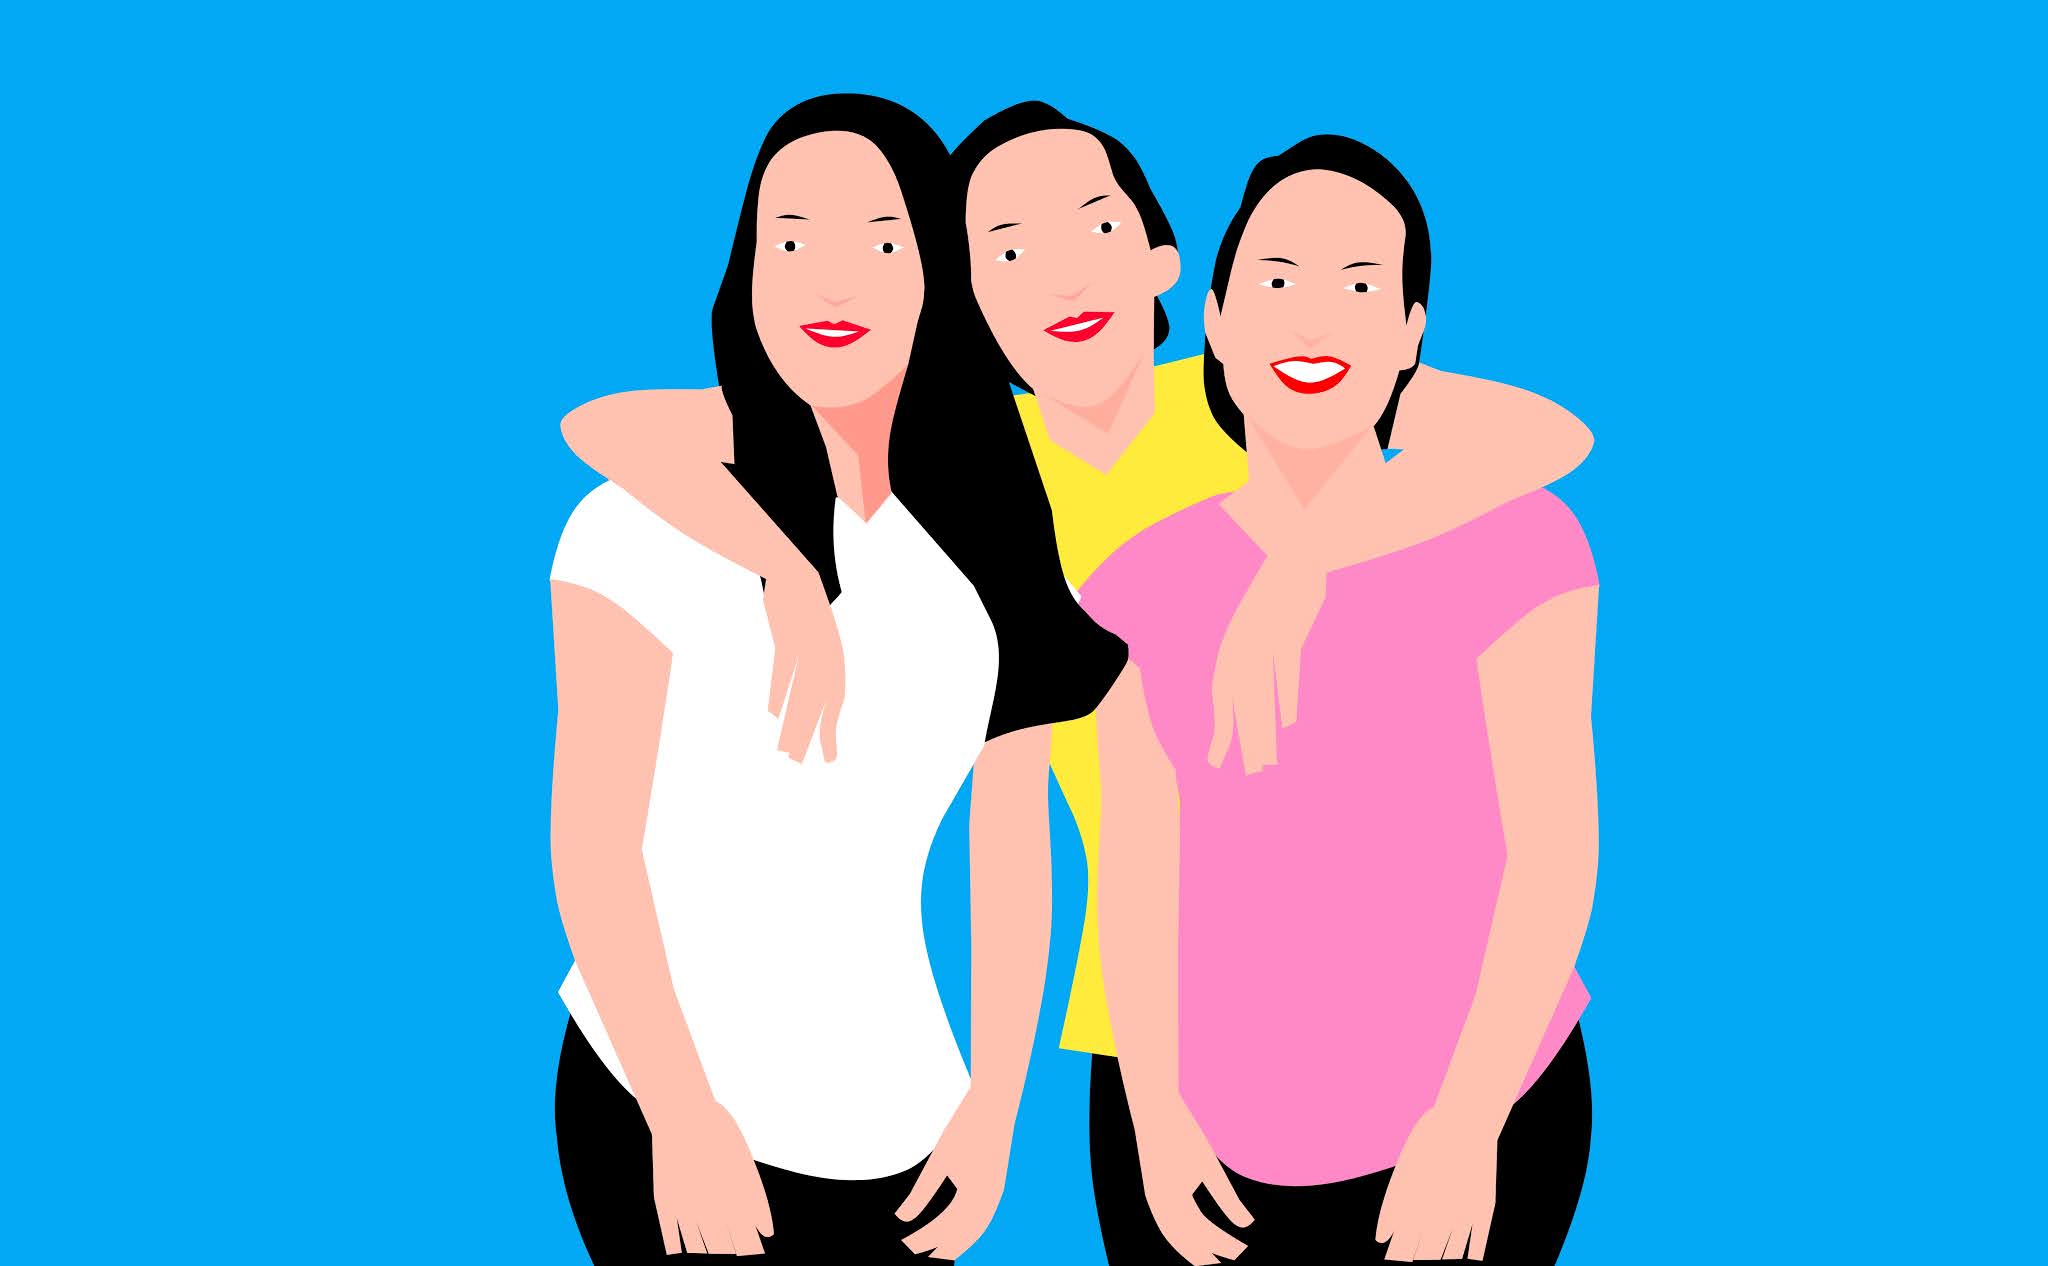 Illustration of happy group of women